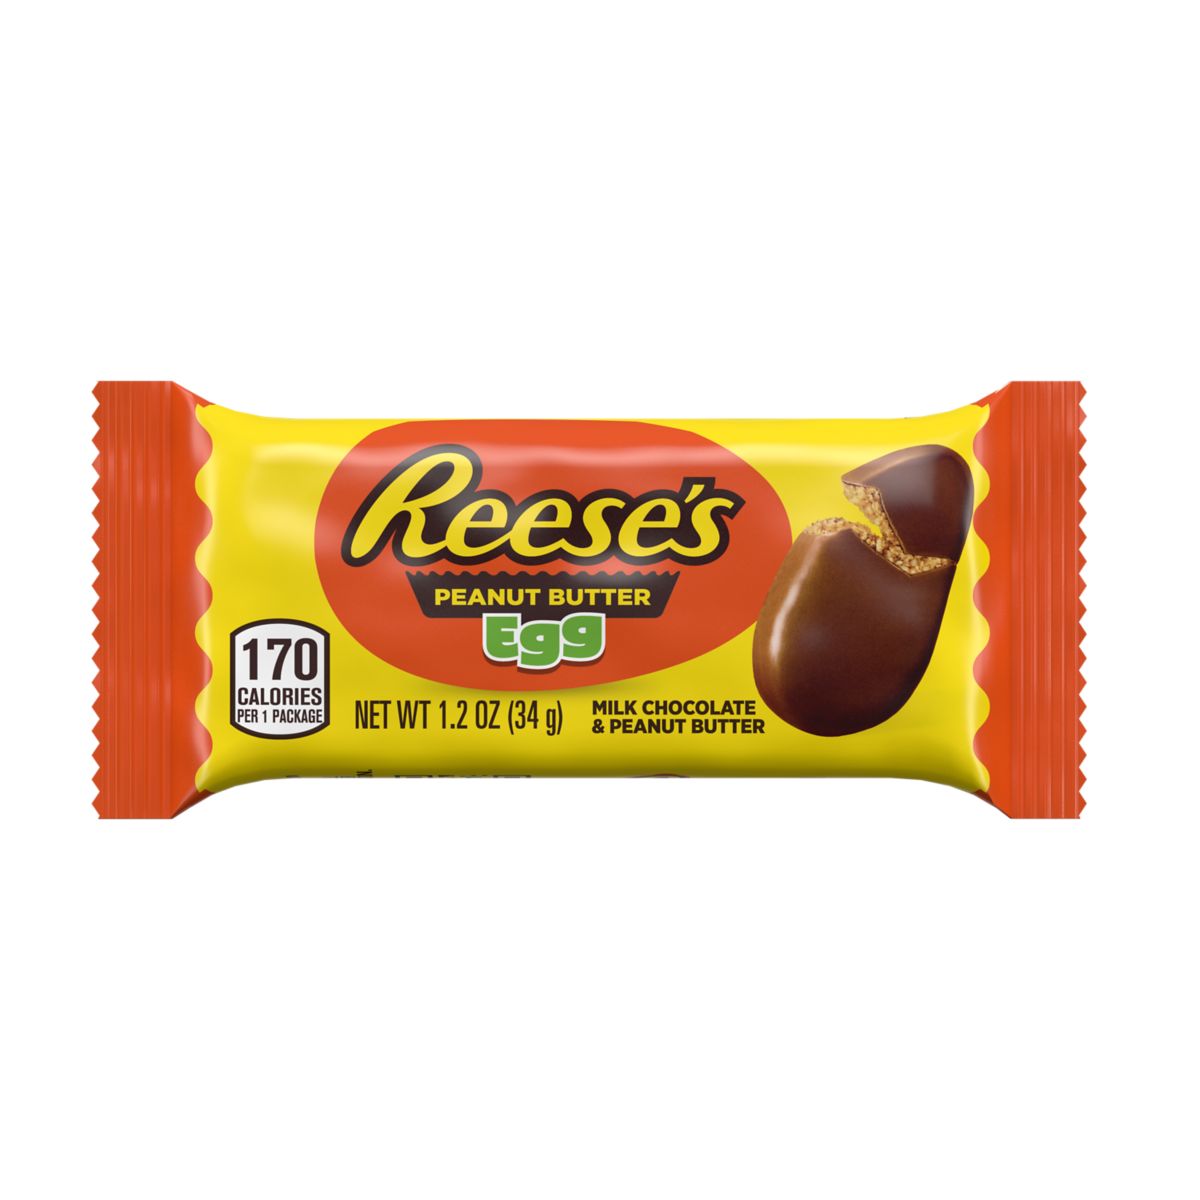 Reese's Peanut Butter & Chocolate